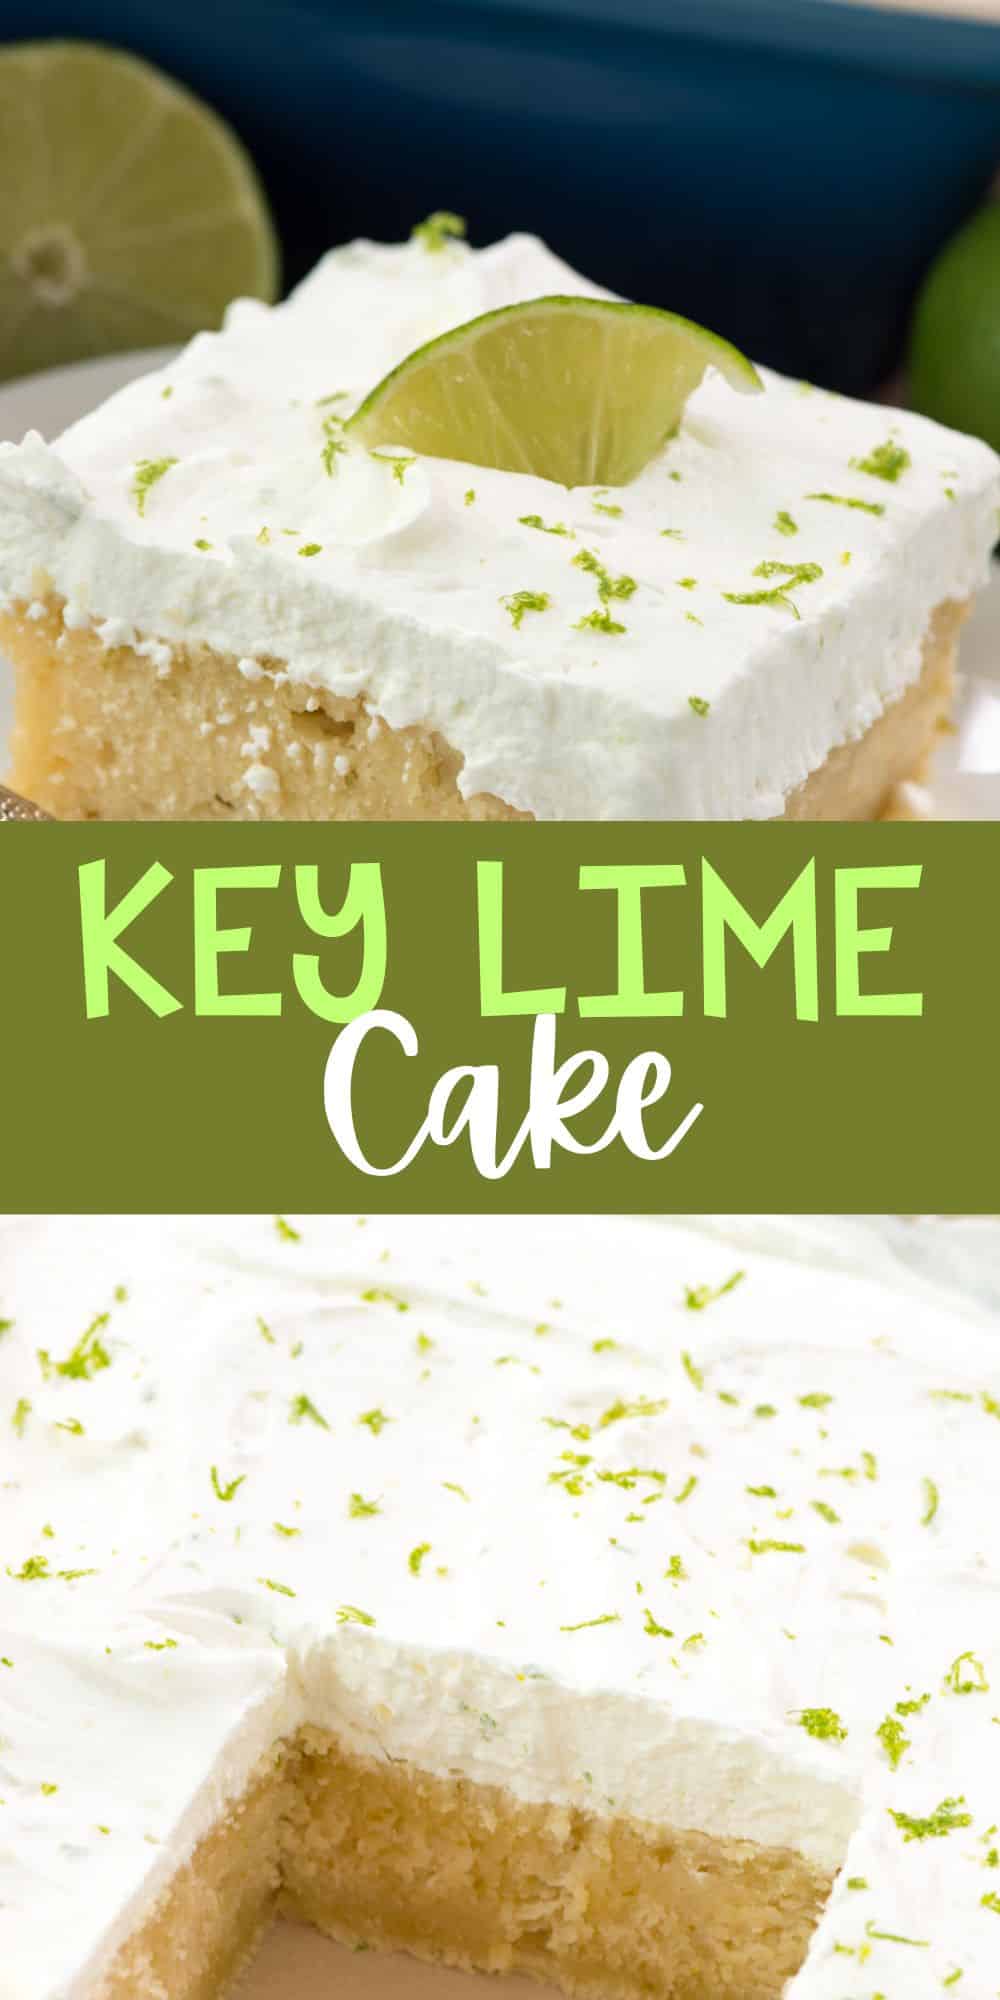 two photos of one slice of key lime cake with a sliced lime on top with words on the image.